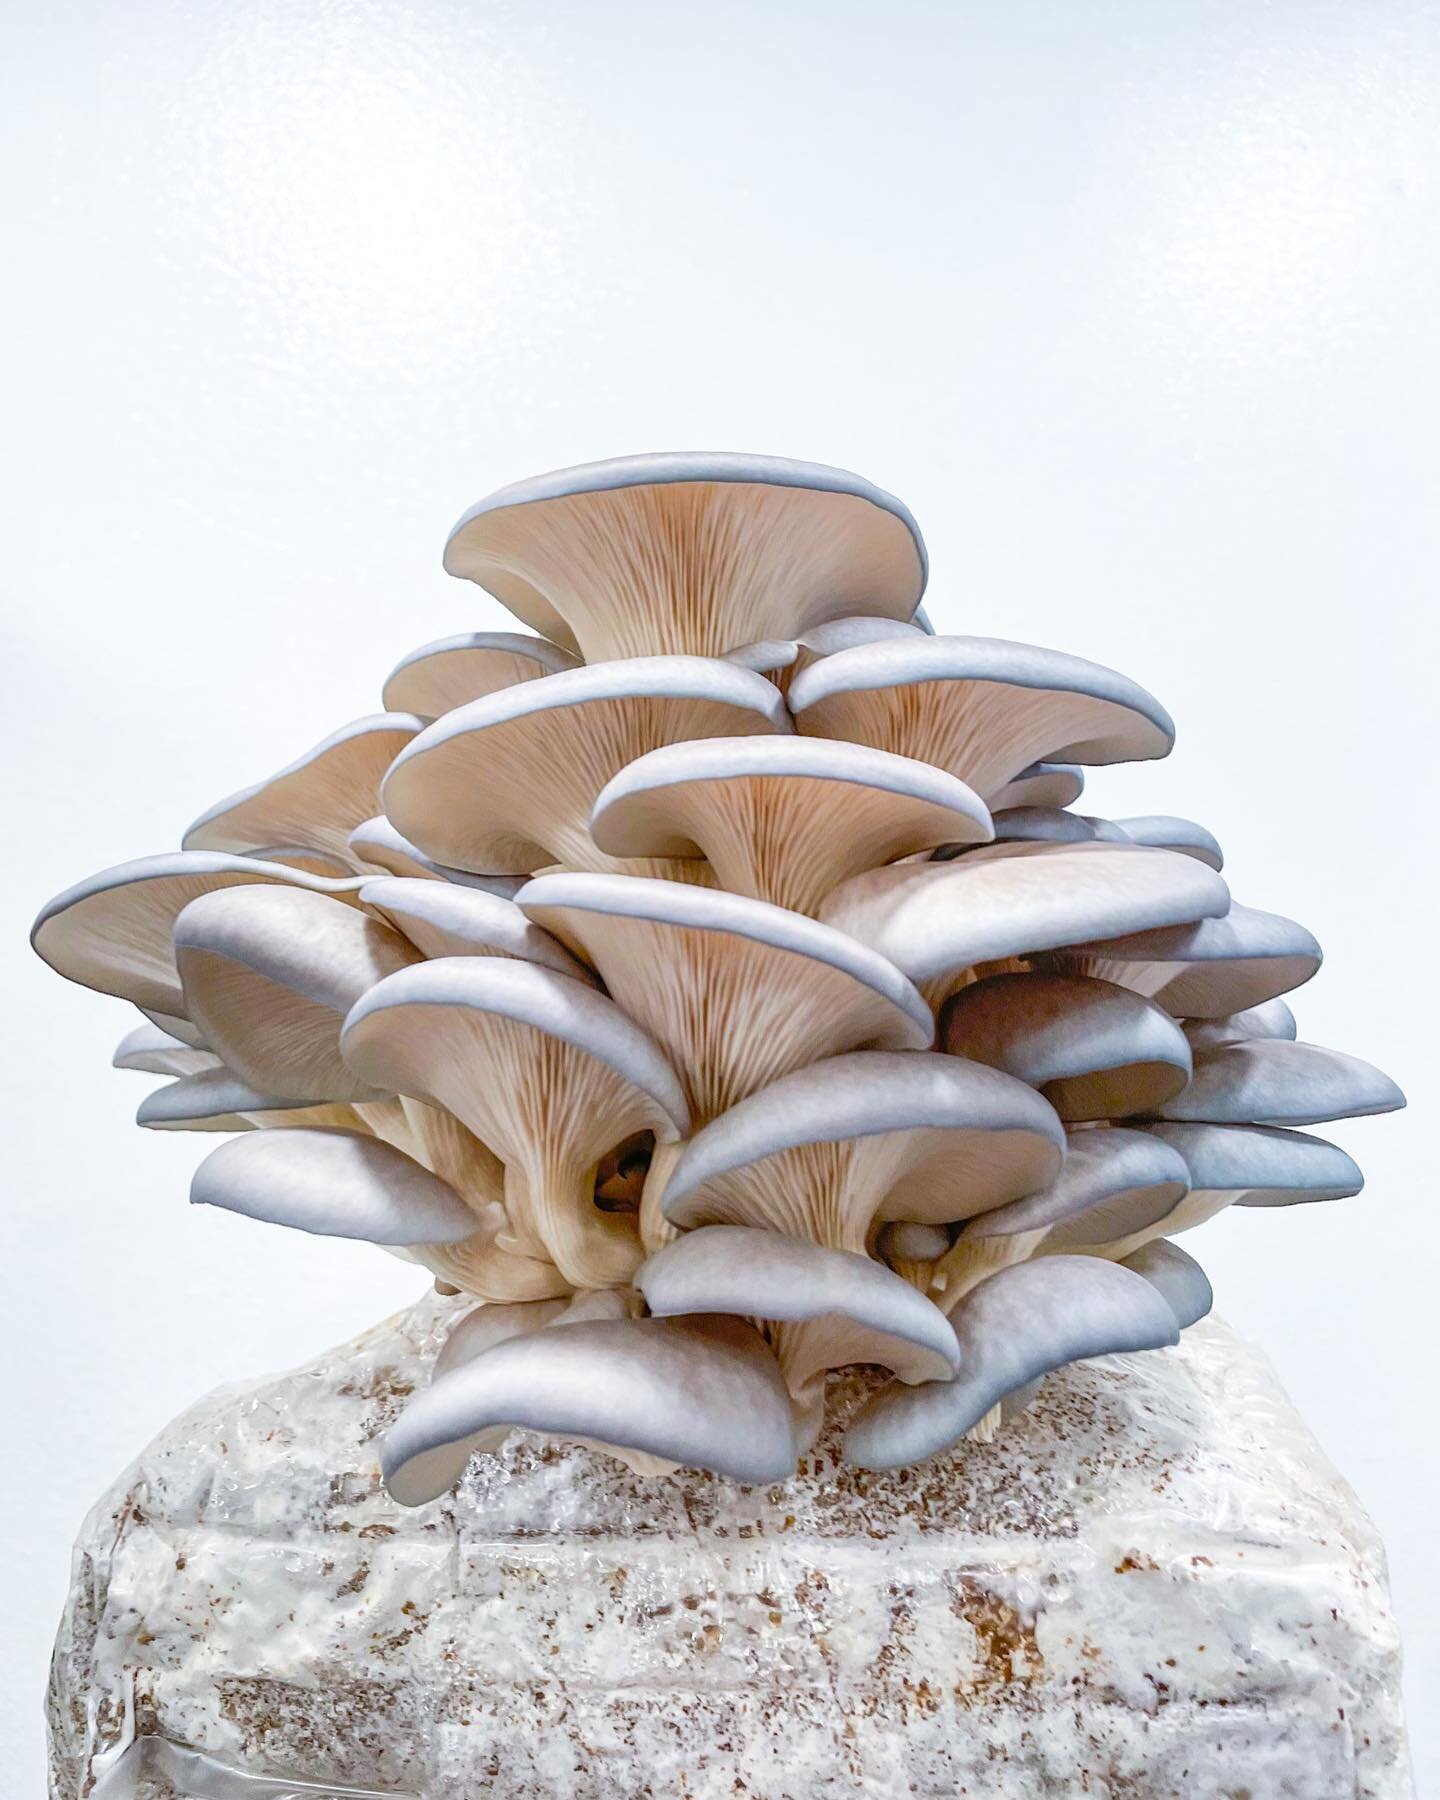 A bouquet of blue oyster mushrooms. #blueoyster #gourmetmushrooms #oystermushrooms #fungi #urbanmushroomfarm